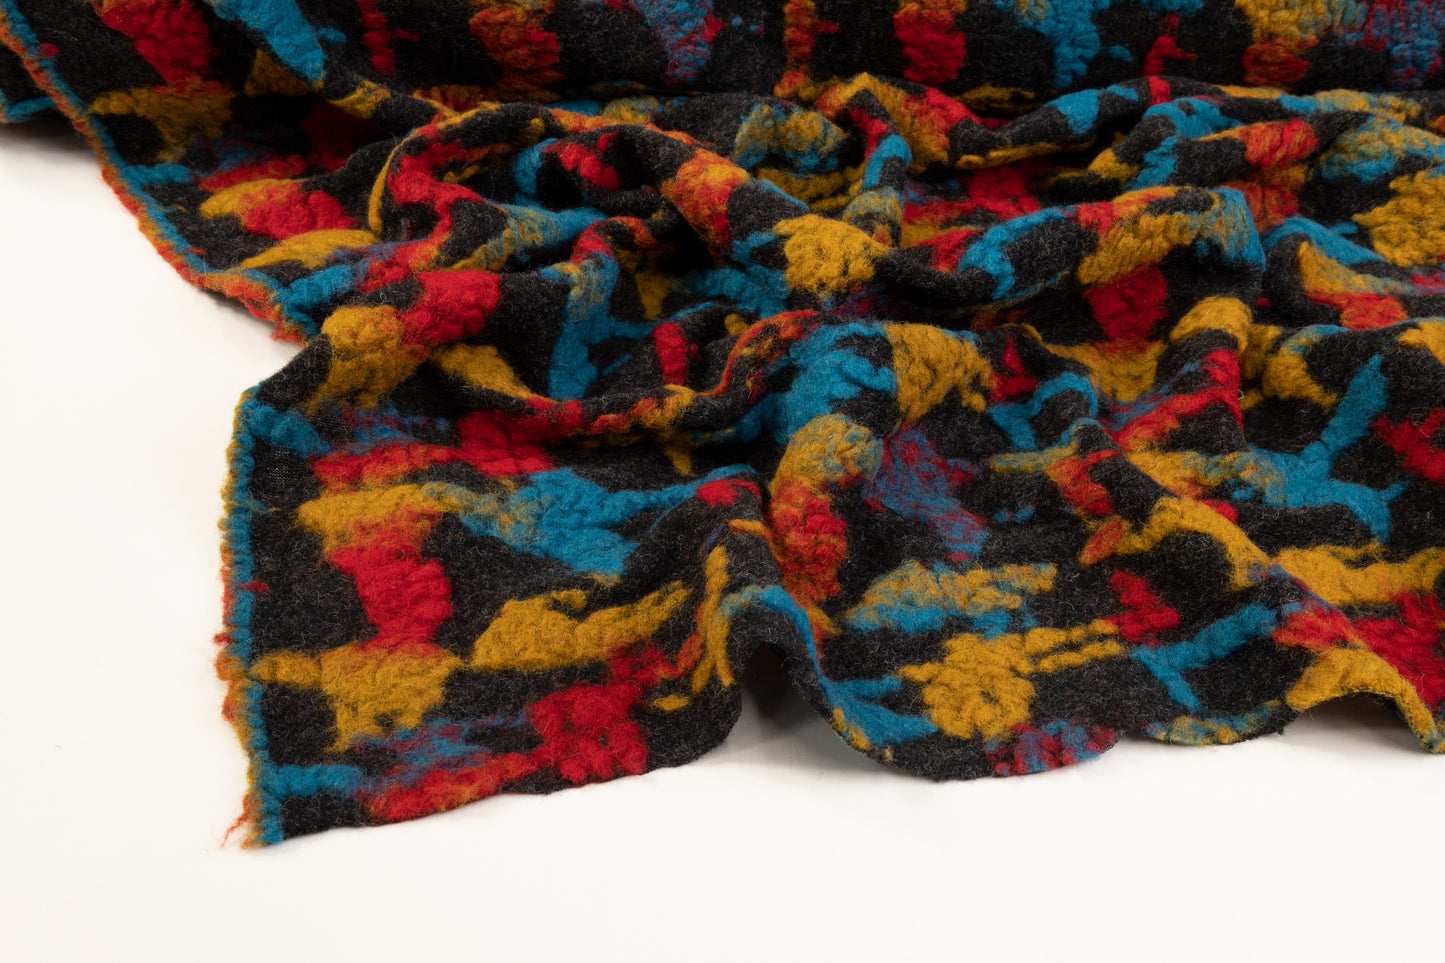 Abstract Italian Boiled Wool - Multicolor